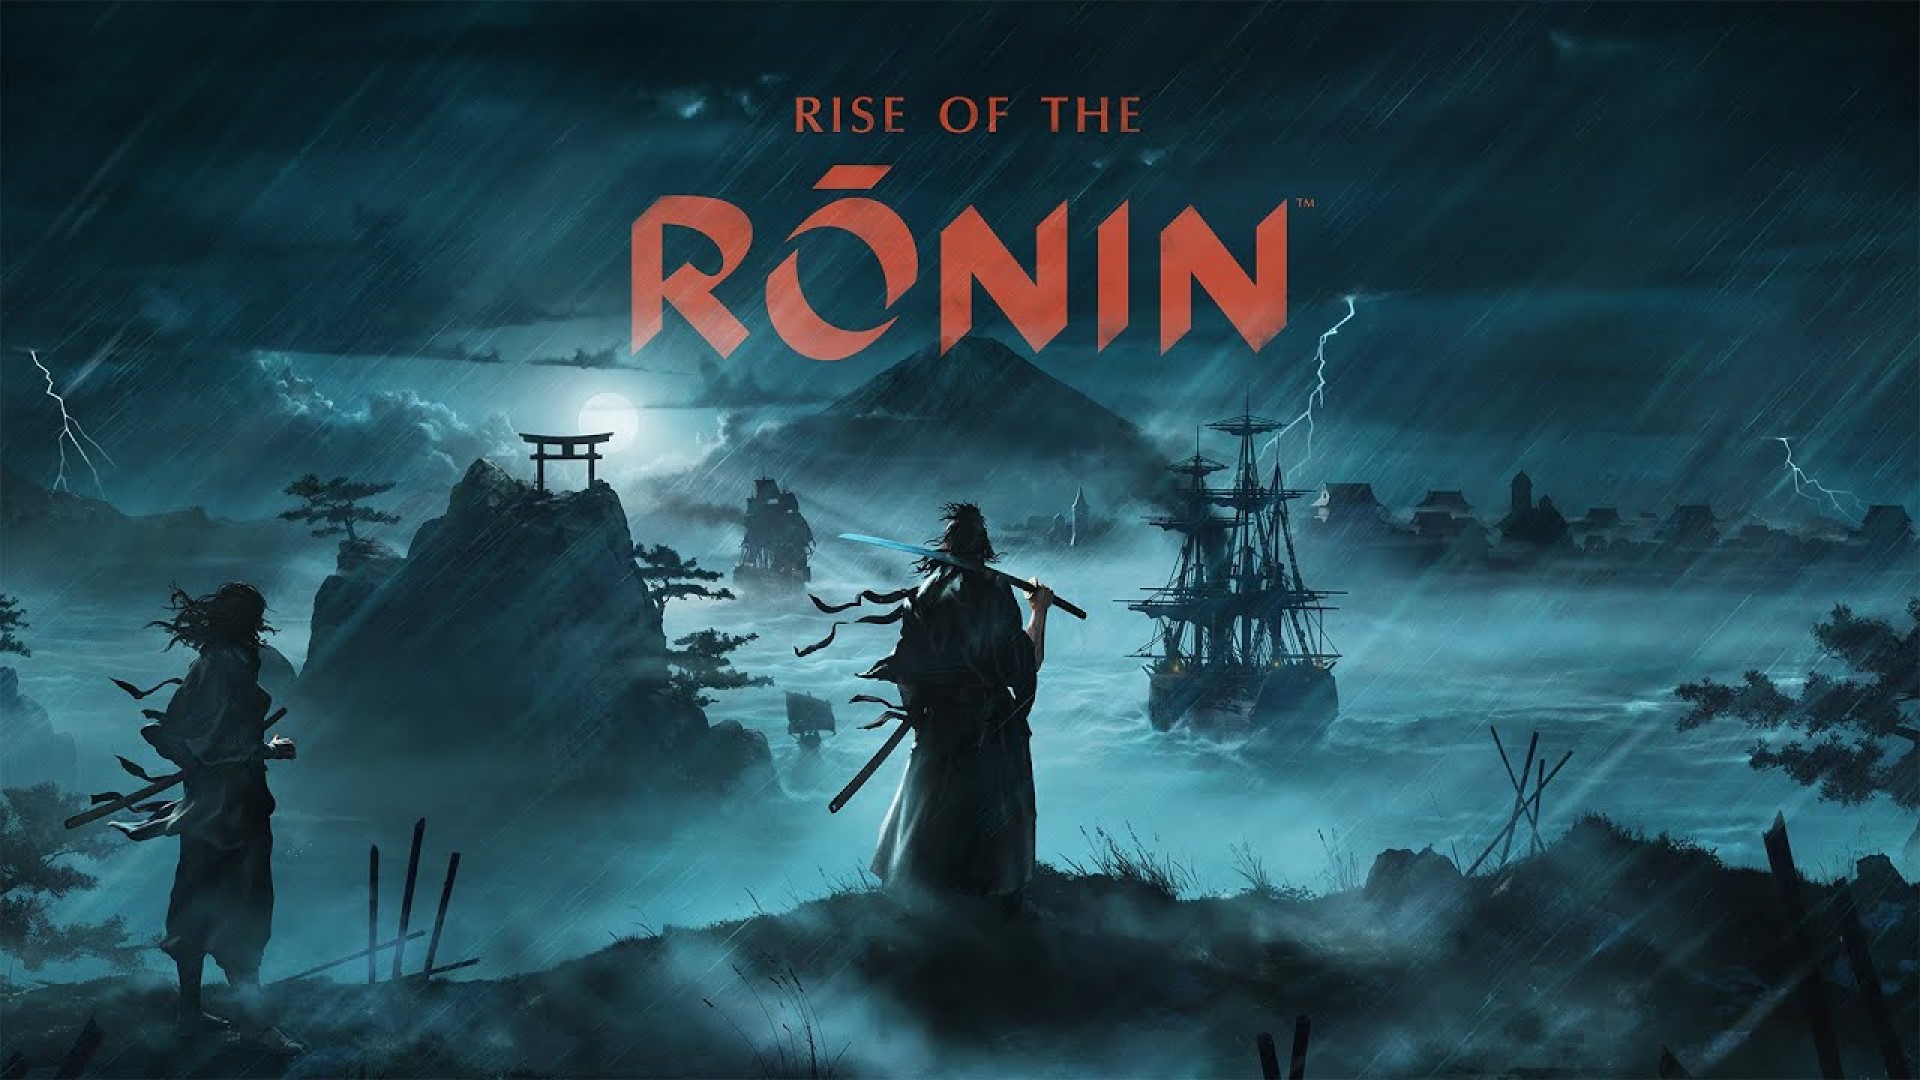 PS5 Exclusive Rise of the Ronin – 16 New Details You Should Know